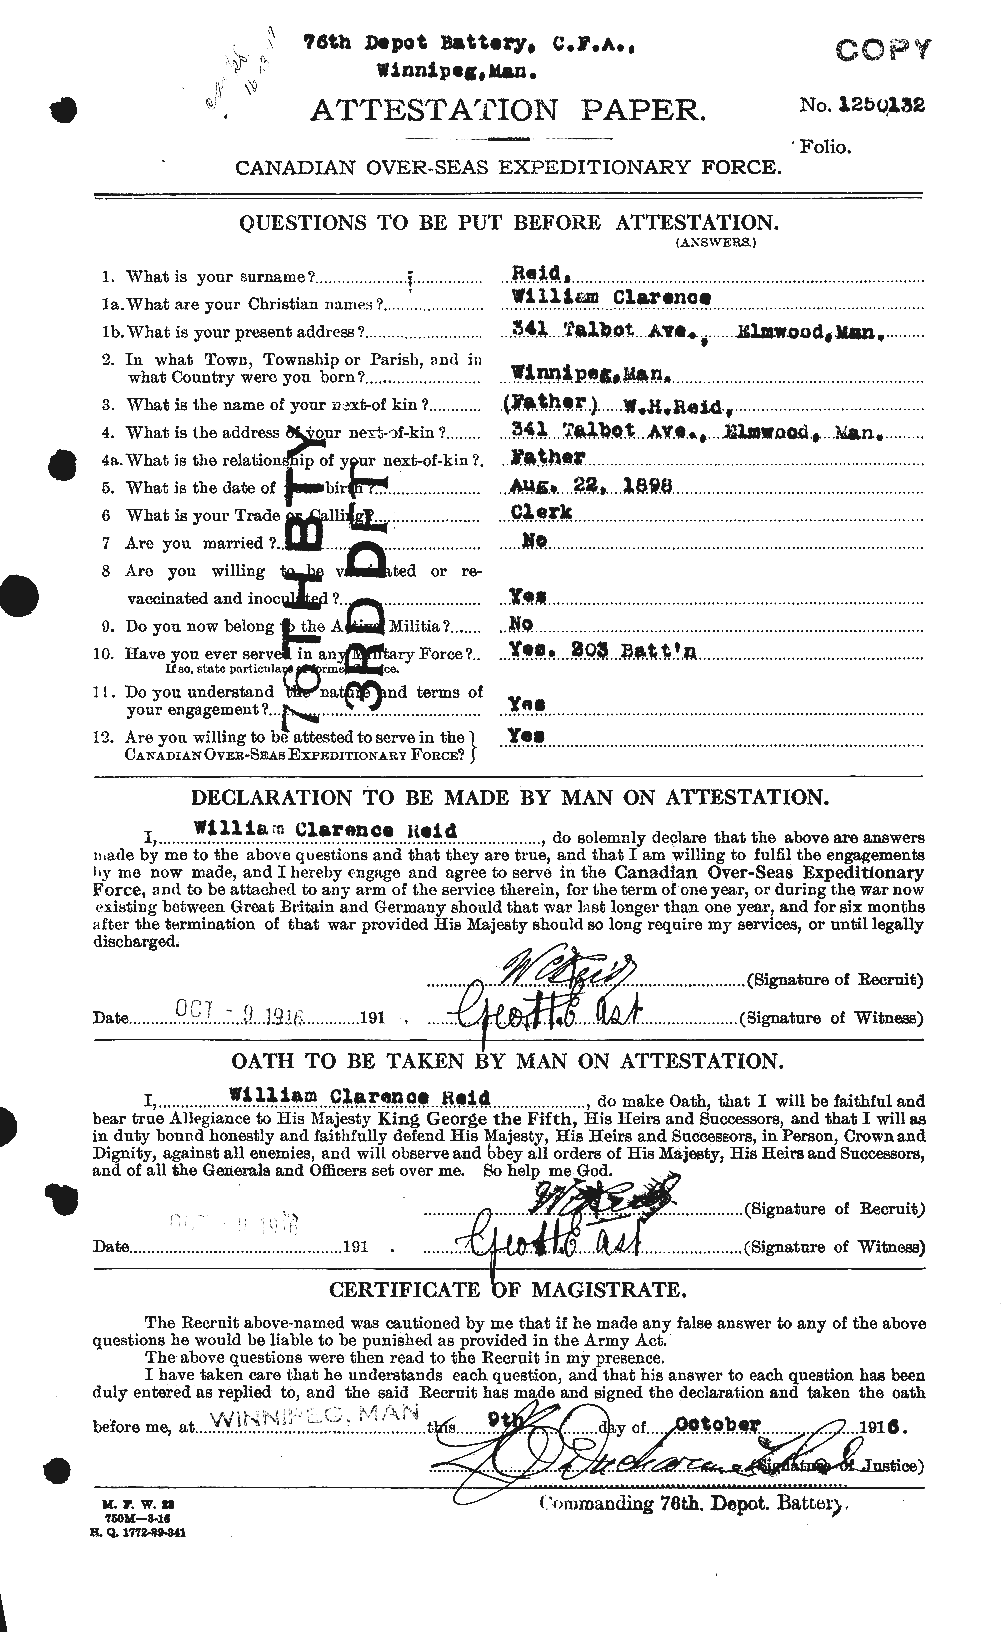 Personnel Records of the First World War - CEF 596972a